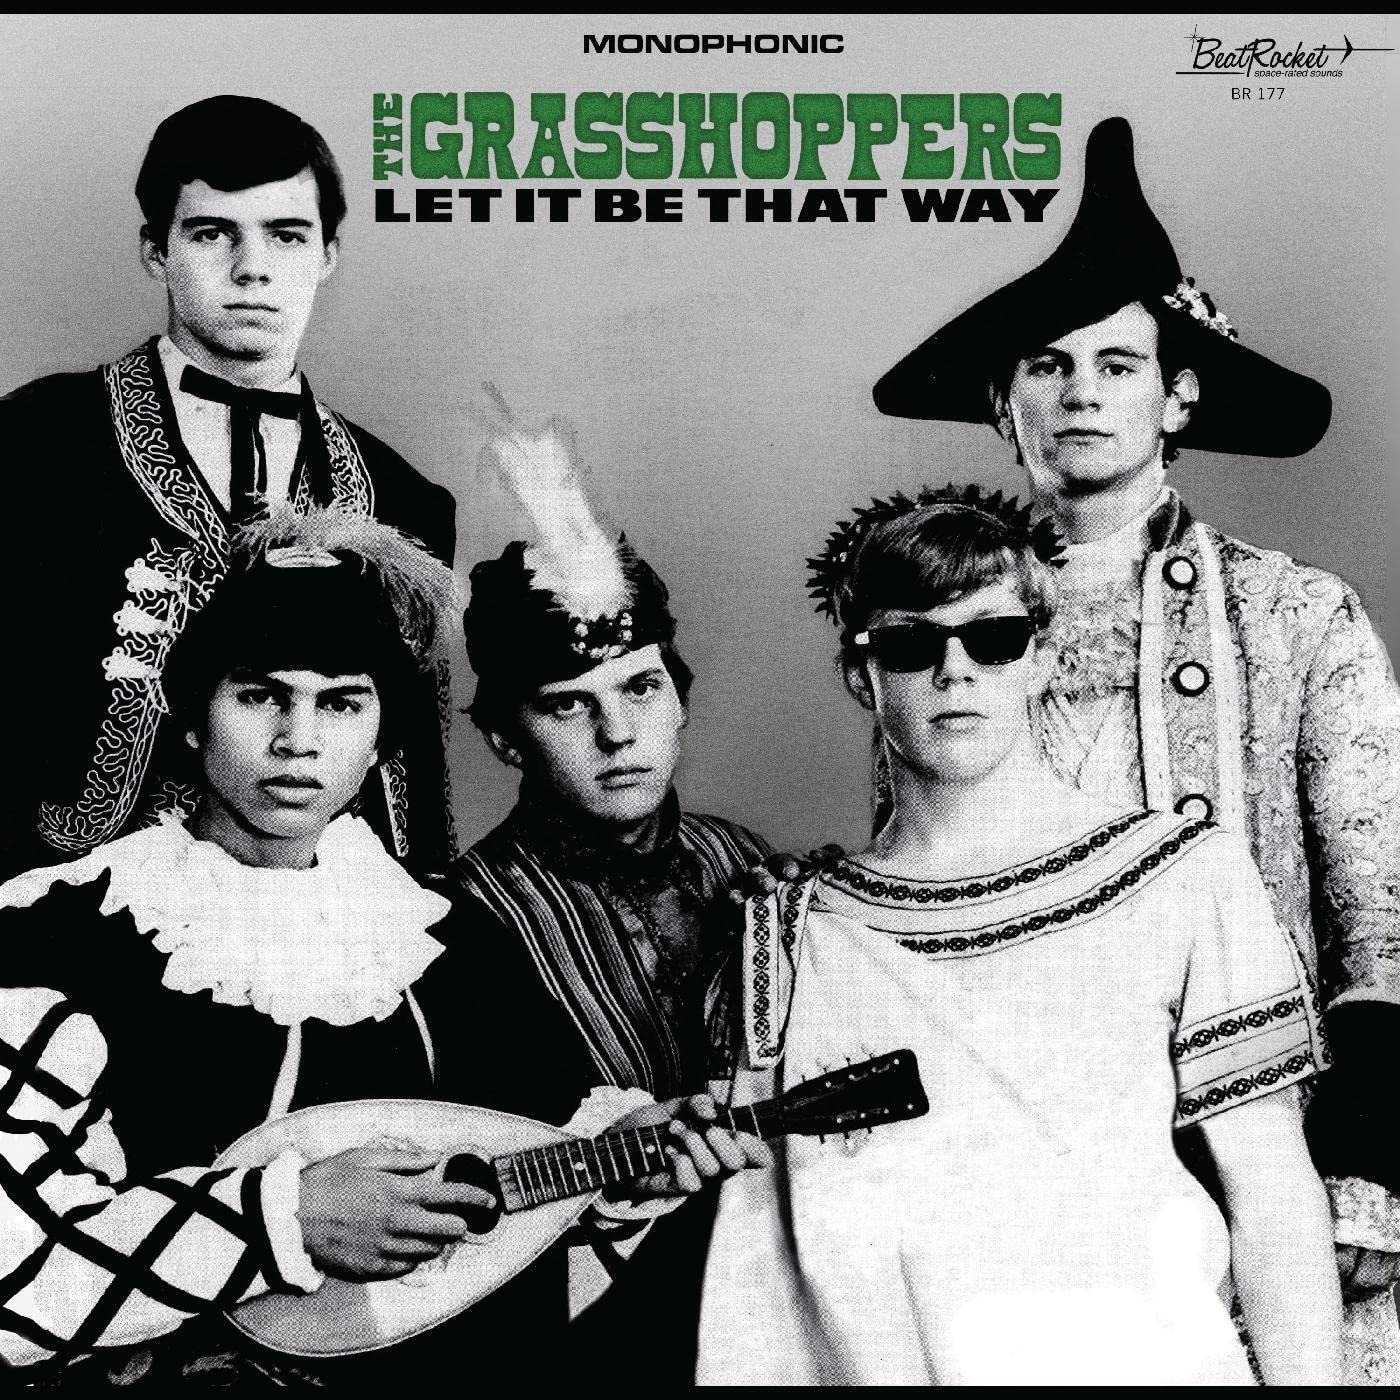 CD Shop - GRASSHOPPERS LET IT BE THAT WAY